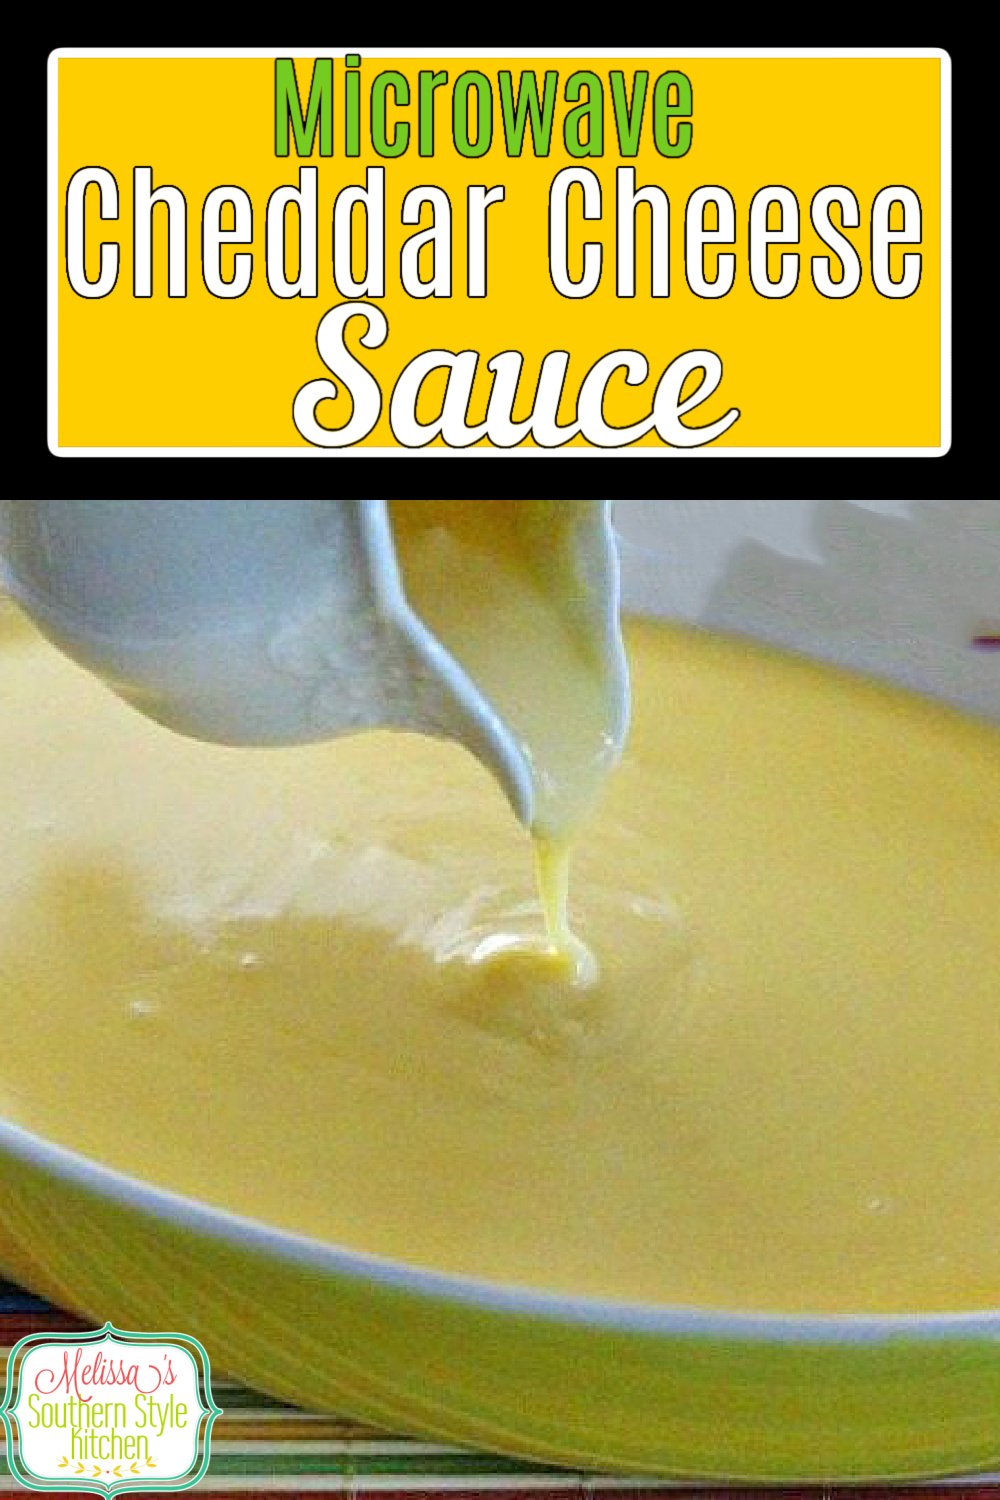 Drizzle this Microwave Cheddar Cheese Sauce over vegetables, tortilla chips, burgers or a quick mac and cheese #cheddarcheesesauce #microwavecheeseauce #cheddarcheese #macandcheese #nachos #easyrecipes #condiments #dinner #dinnerideas via @melissasssk